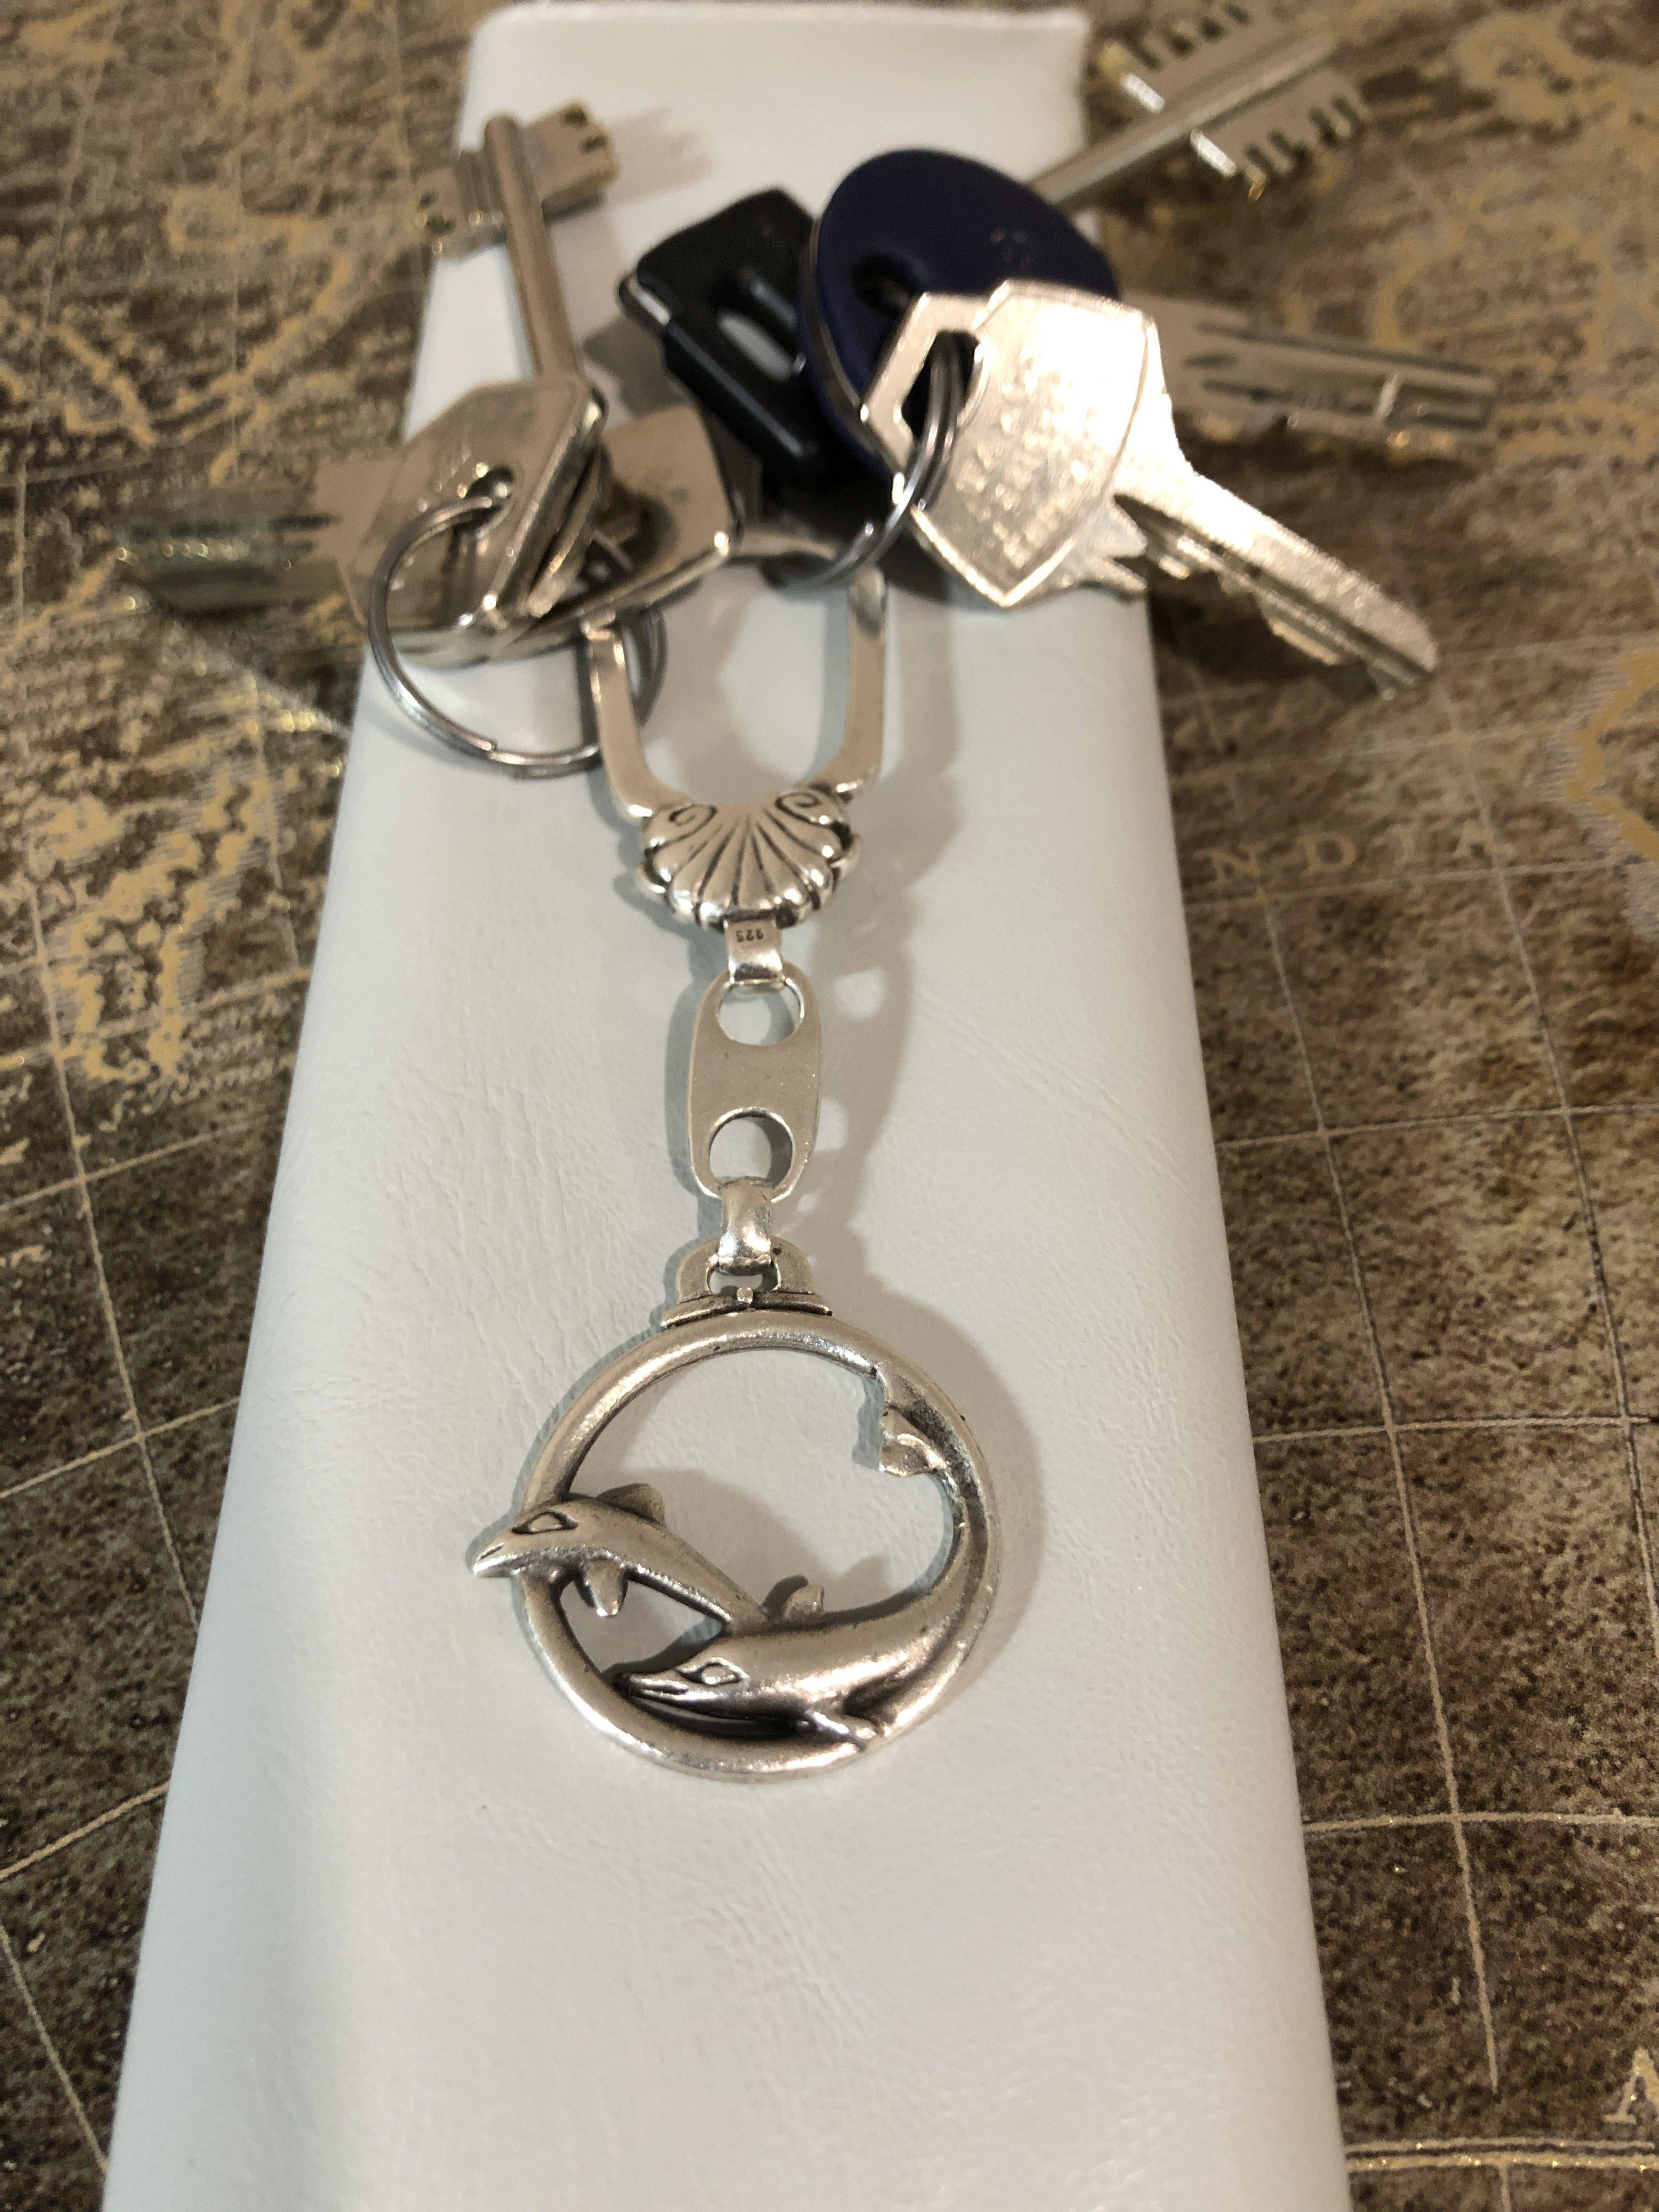 Minoan Dolphins Key ring in sterling silver, silver keychain, men's gift, handmade keychain (MP-08) - ELEFTHERIOU EL